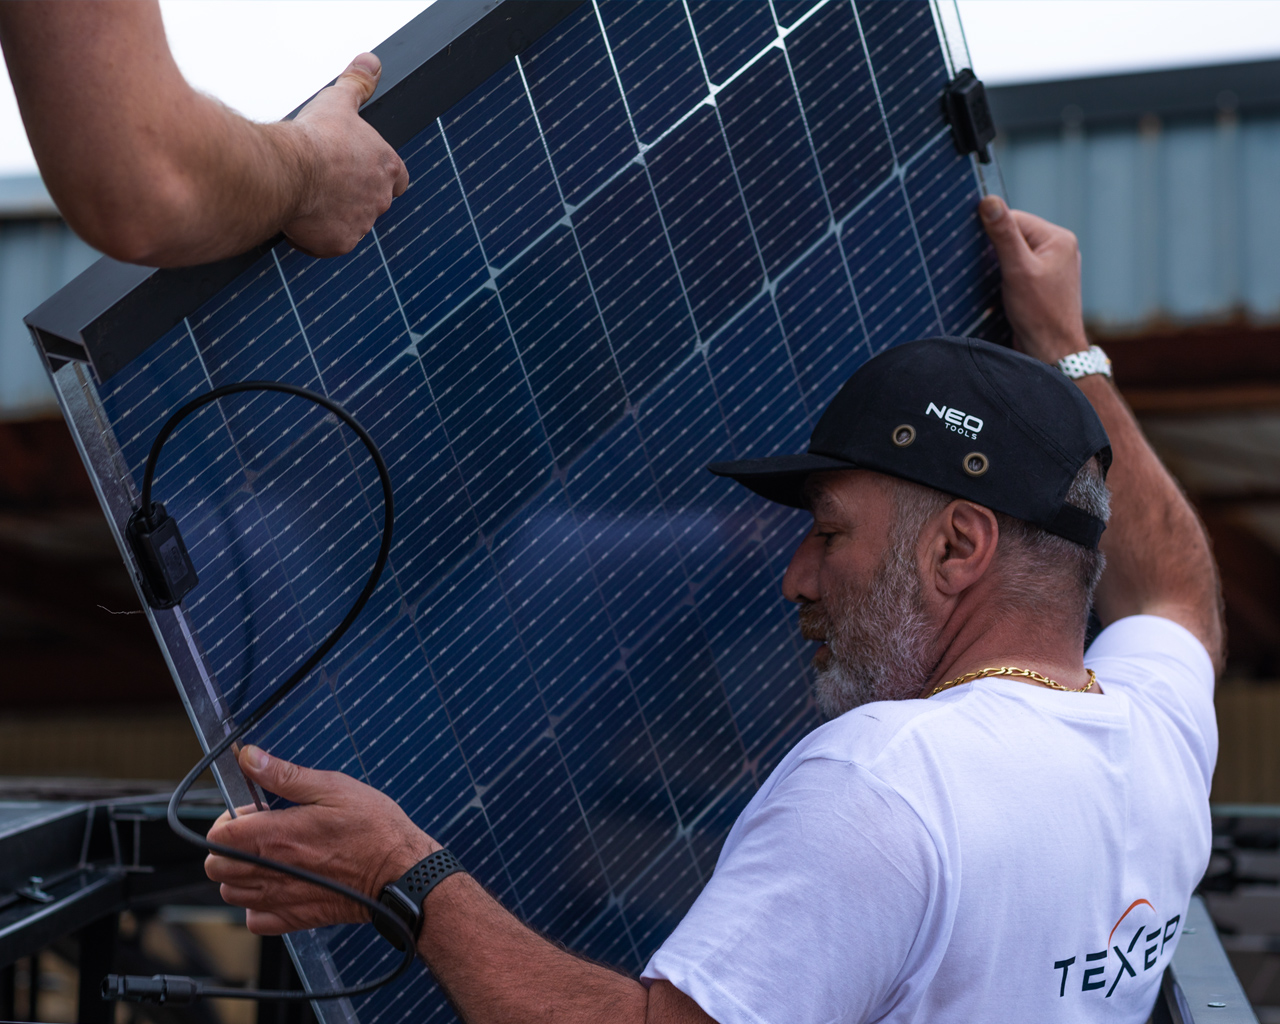 Serge Bosca mounting solar modules onto the roof of the Aquaviva station